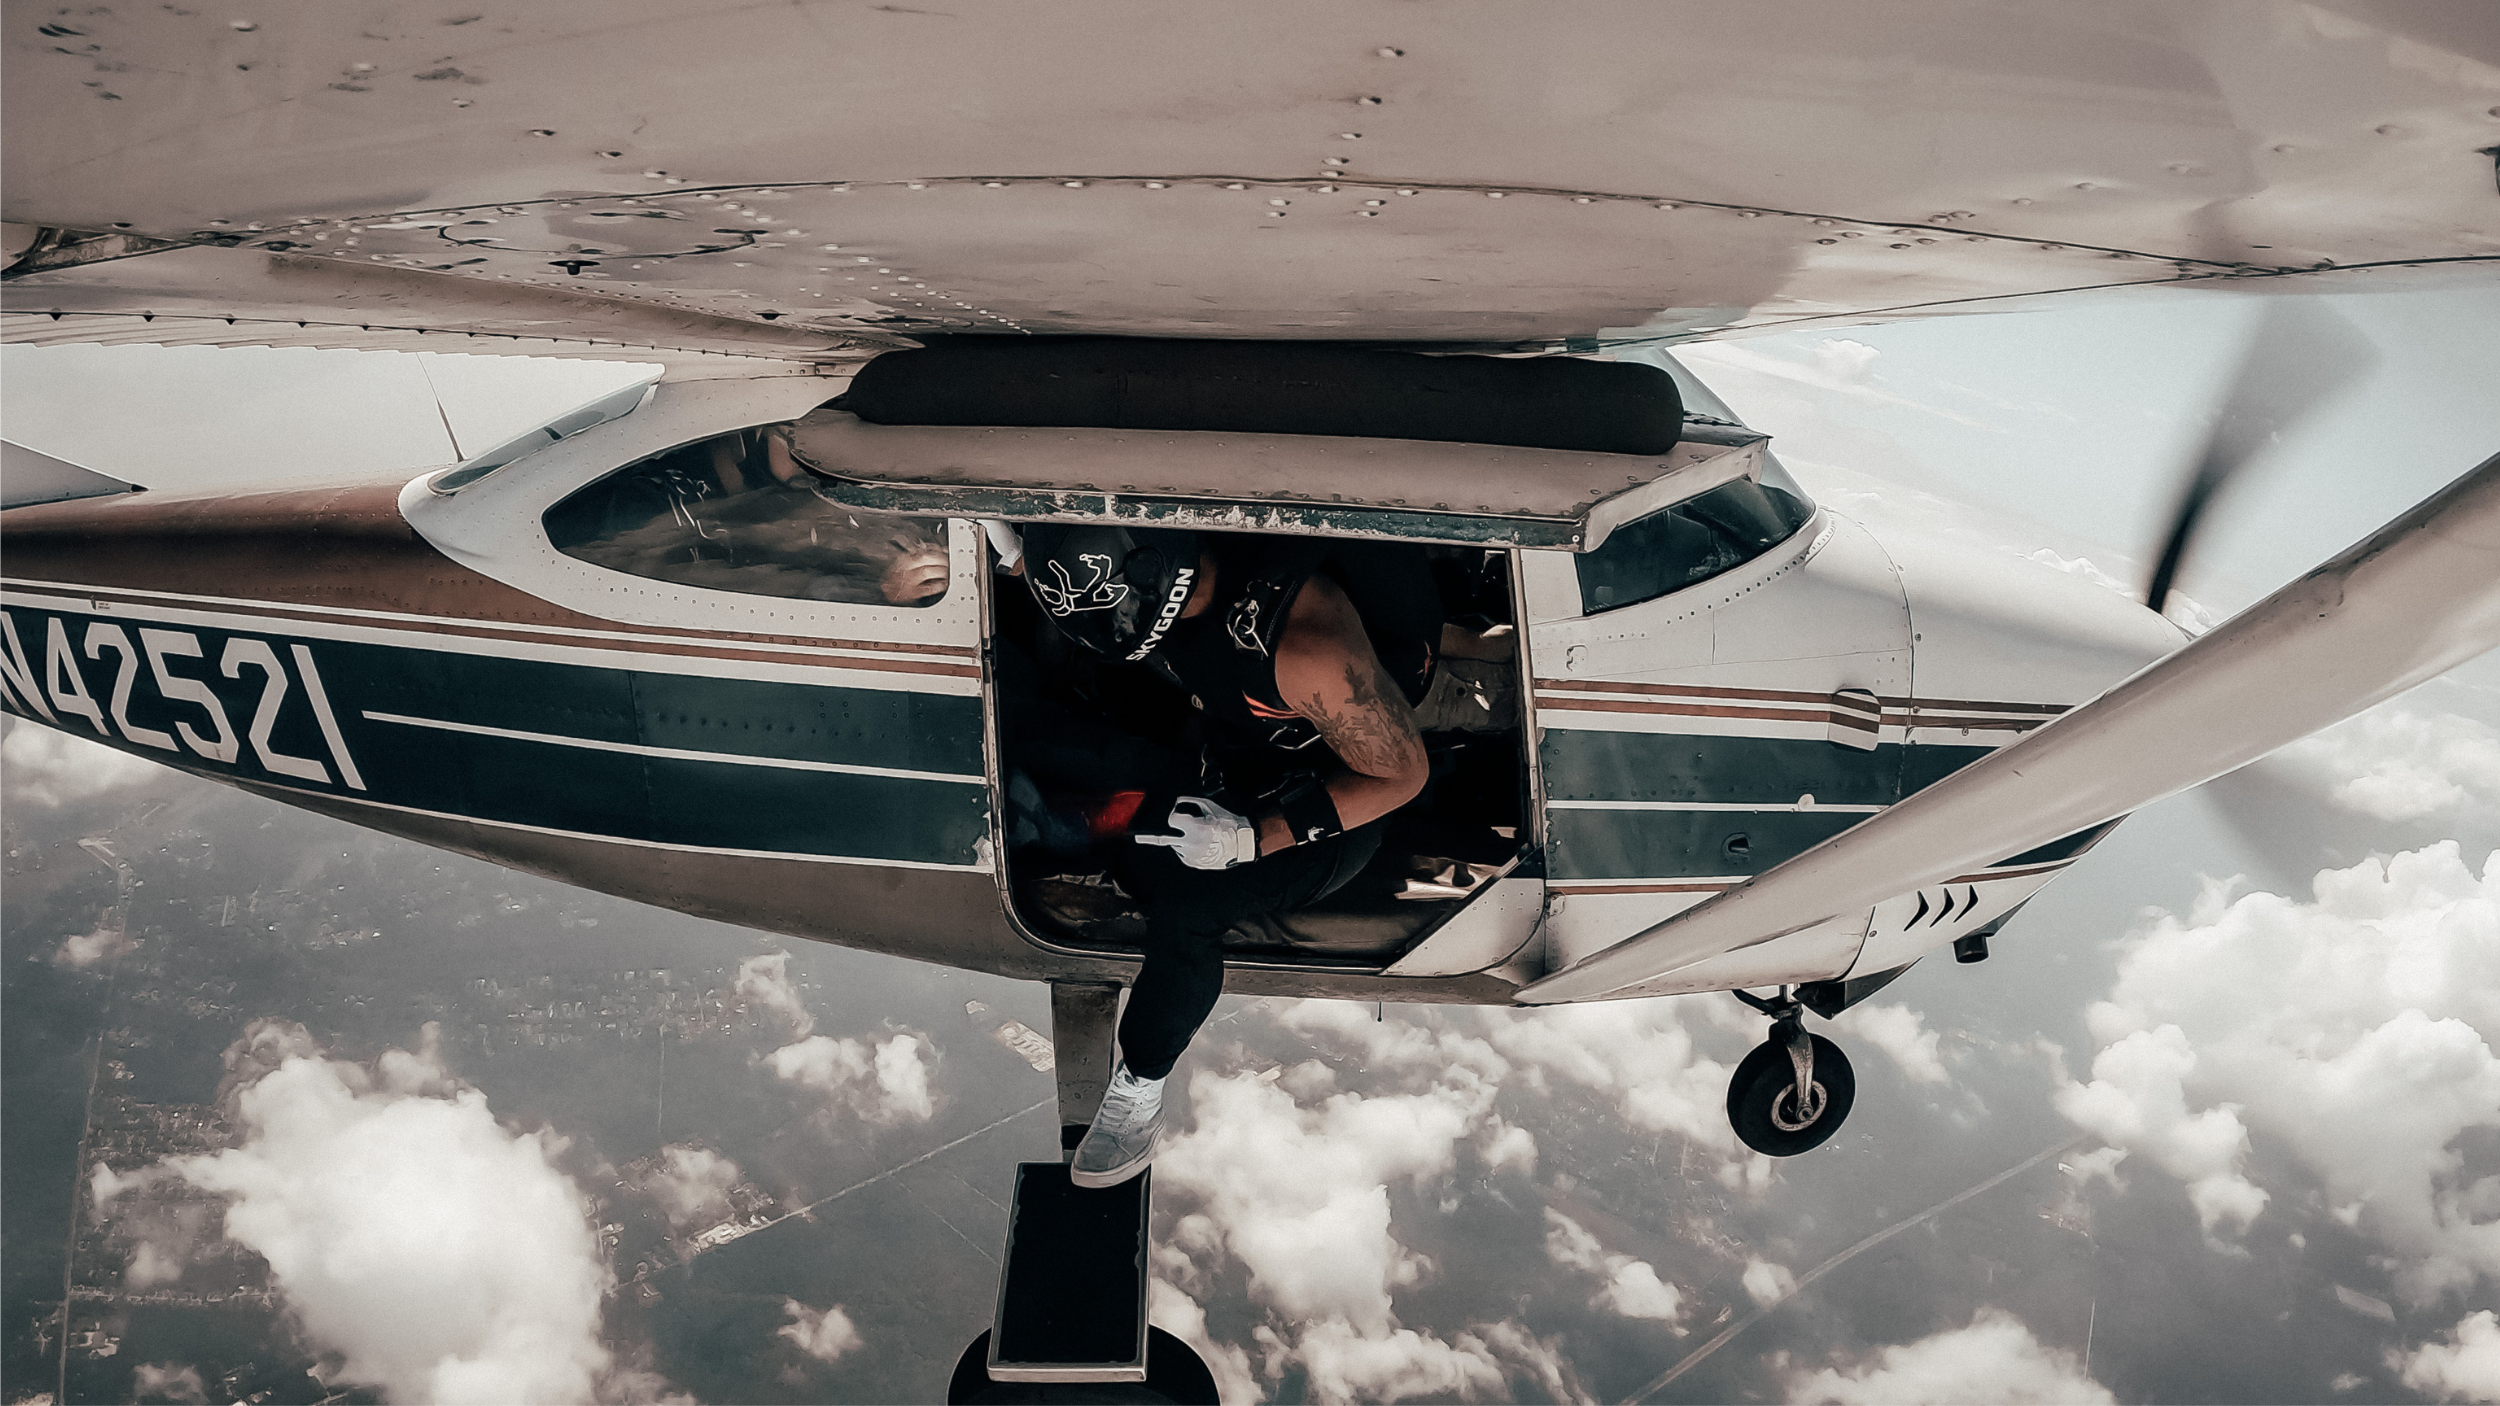 A skydiver in a black jumpsuit prepares to jump from a small airplane, high above a landscape of clouds and land.